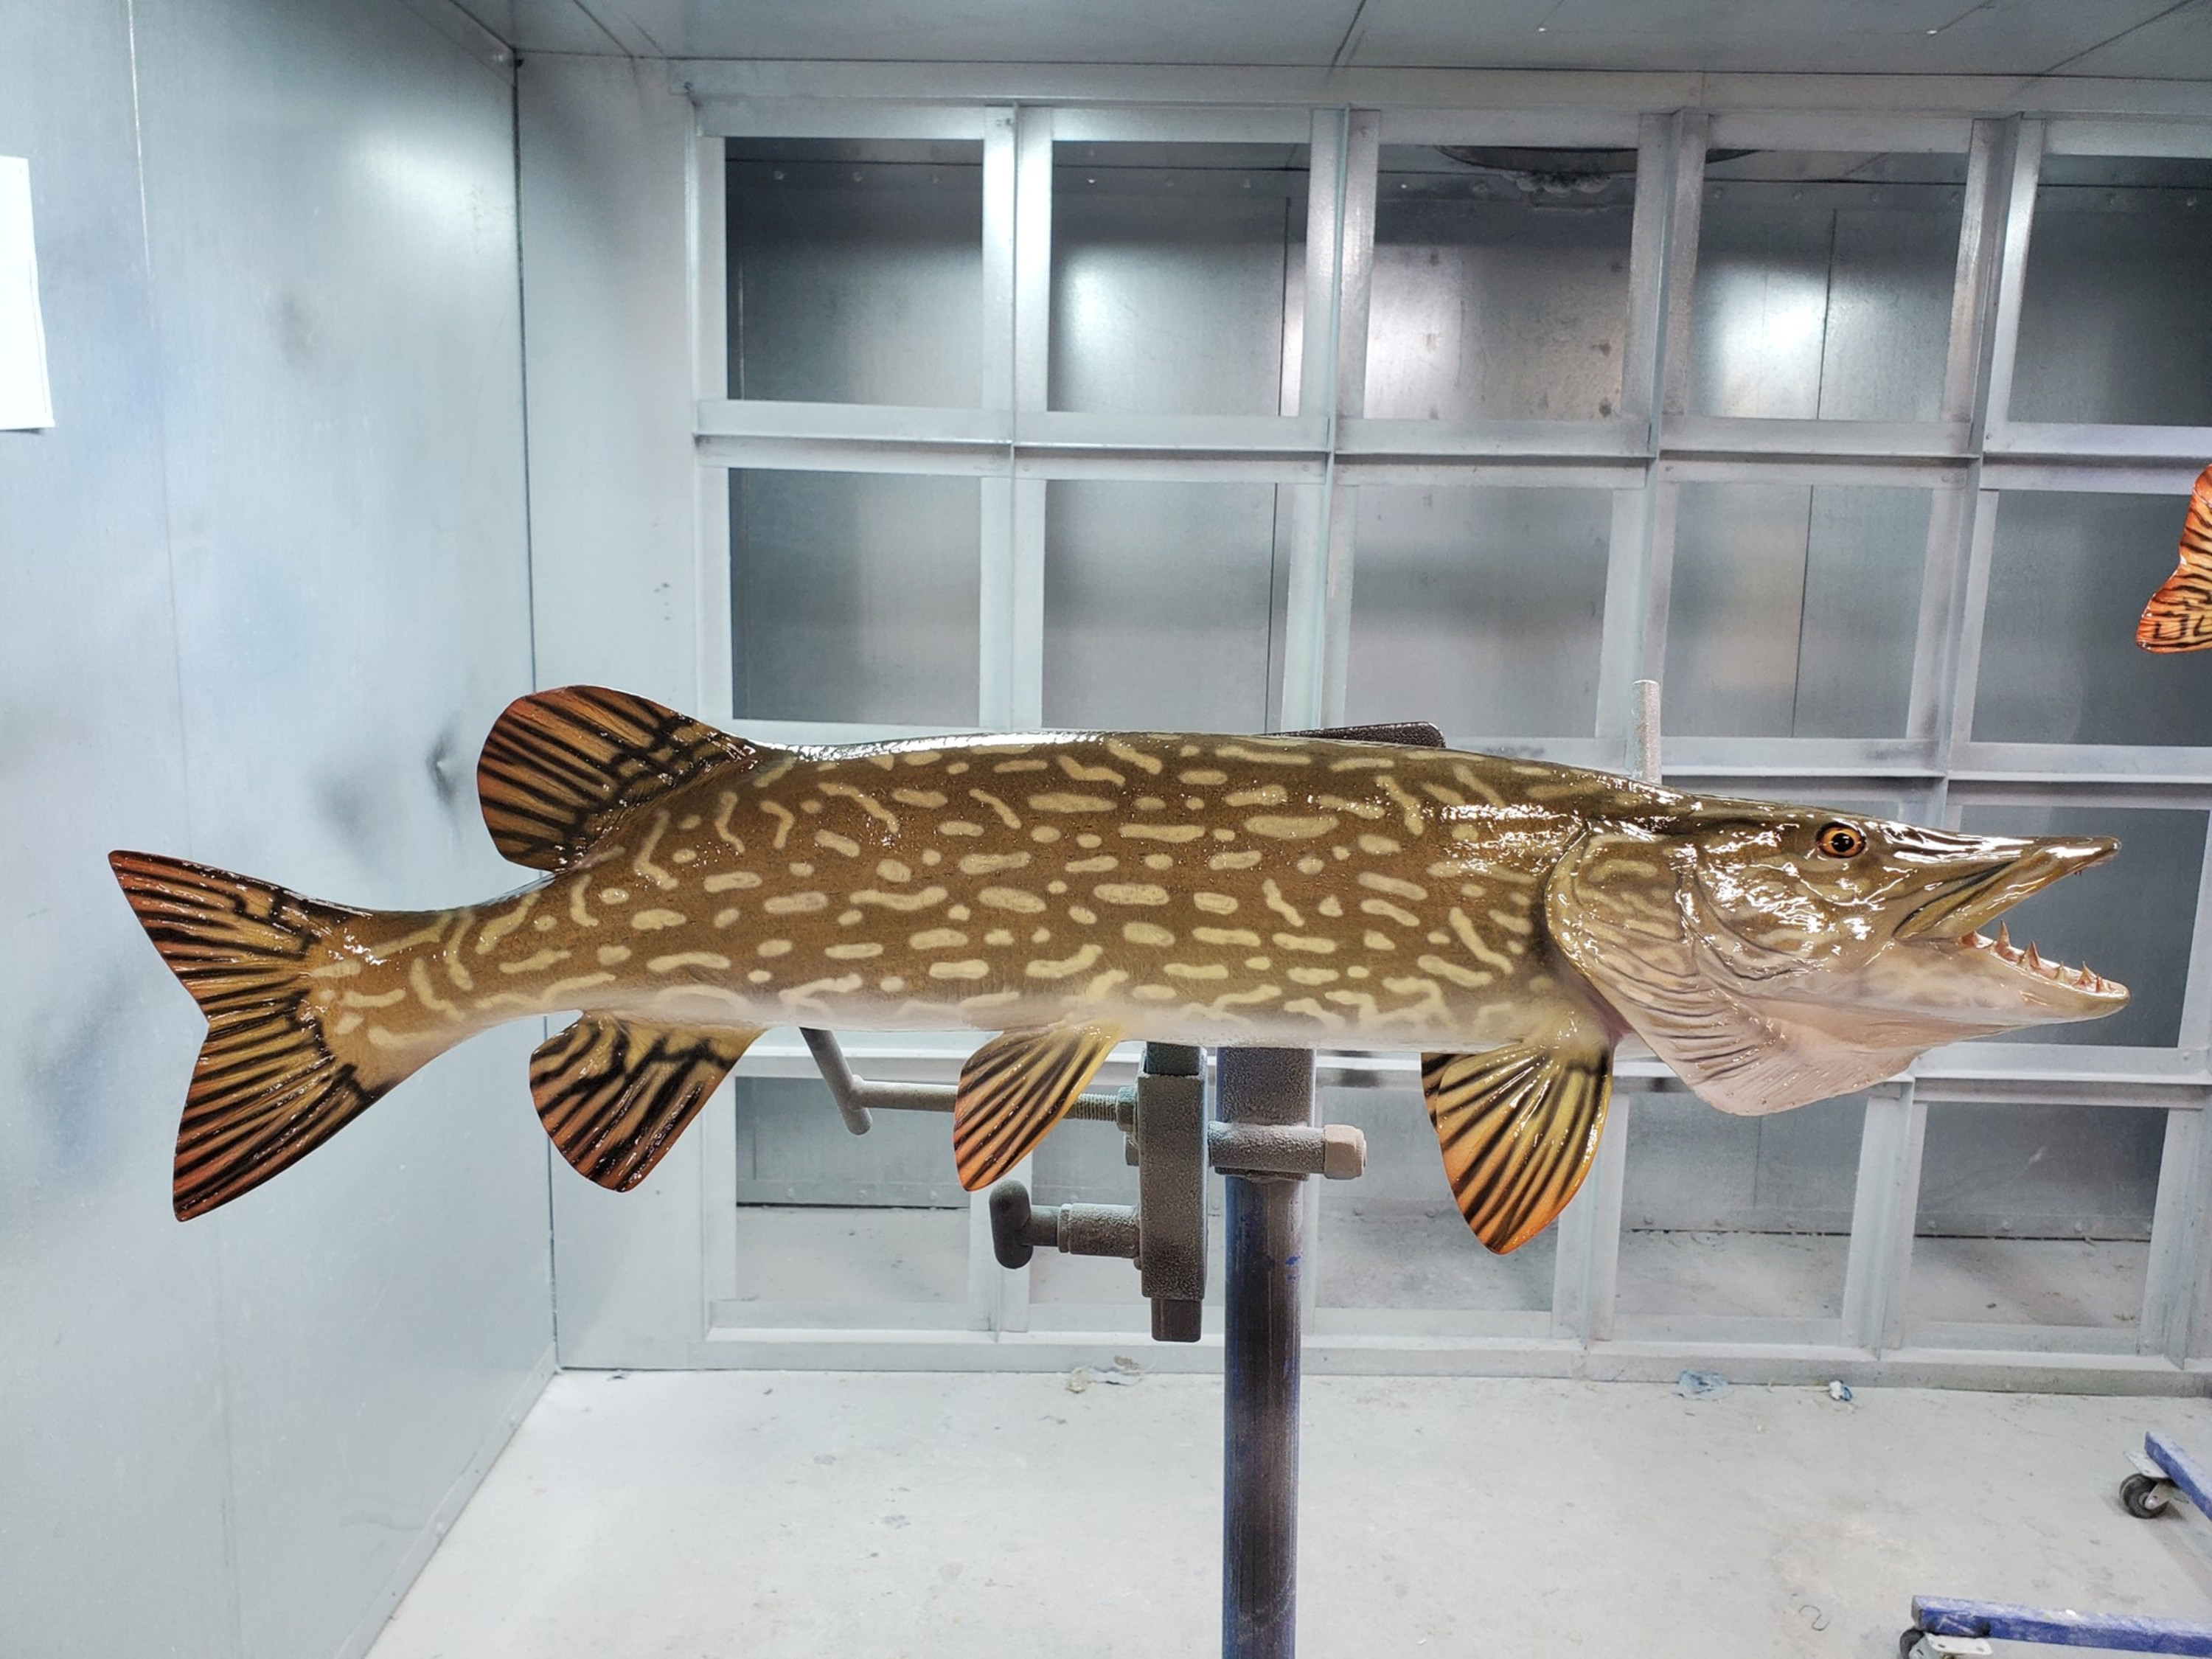 Northern Pike Fish Mounts & Replicas by Coast-to-Coast Fish Mounts